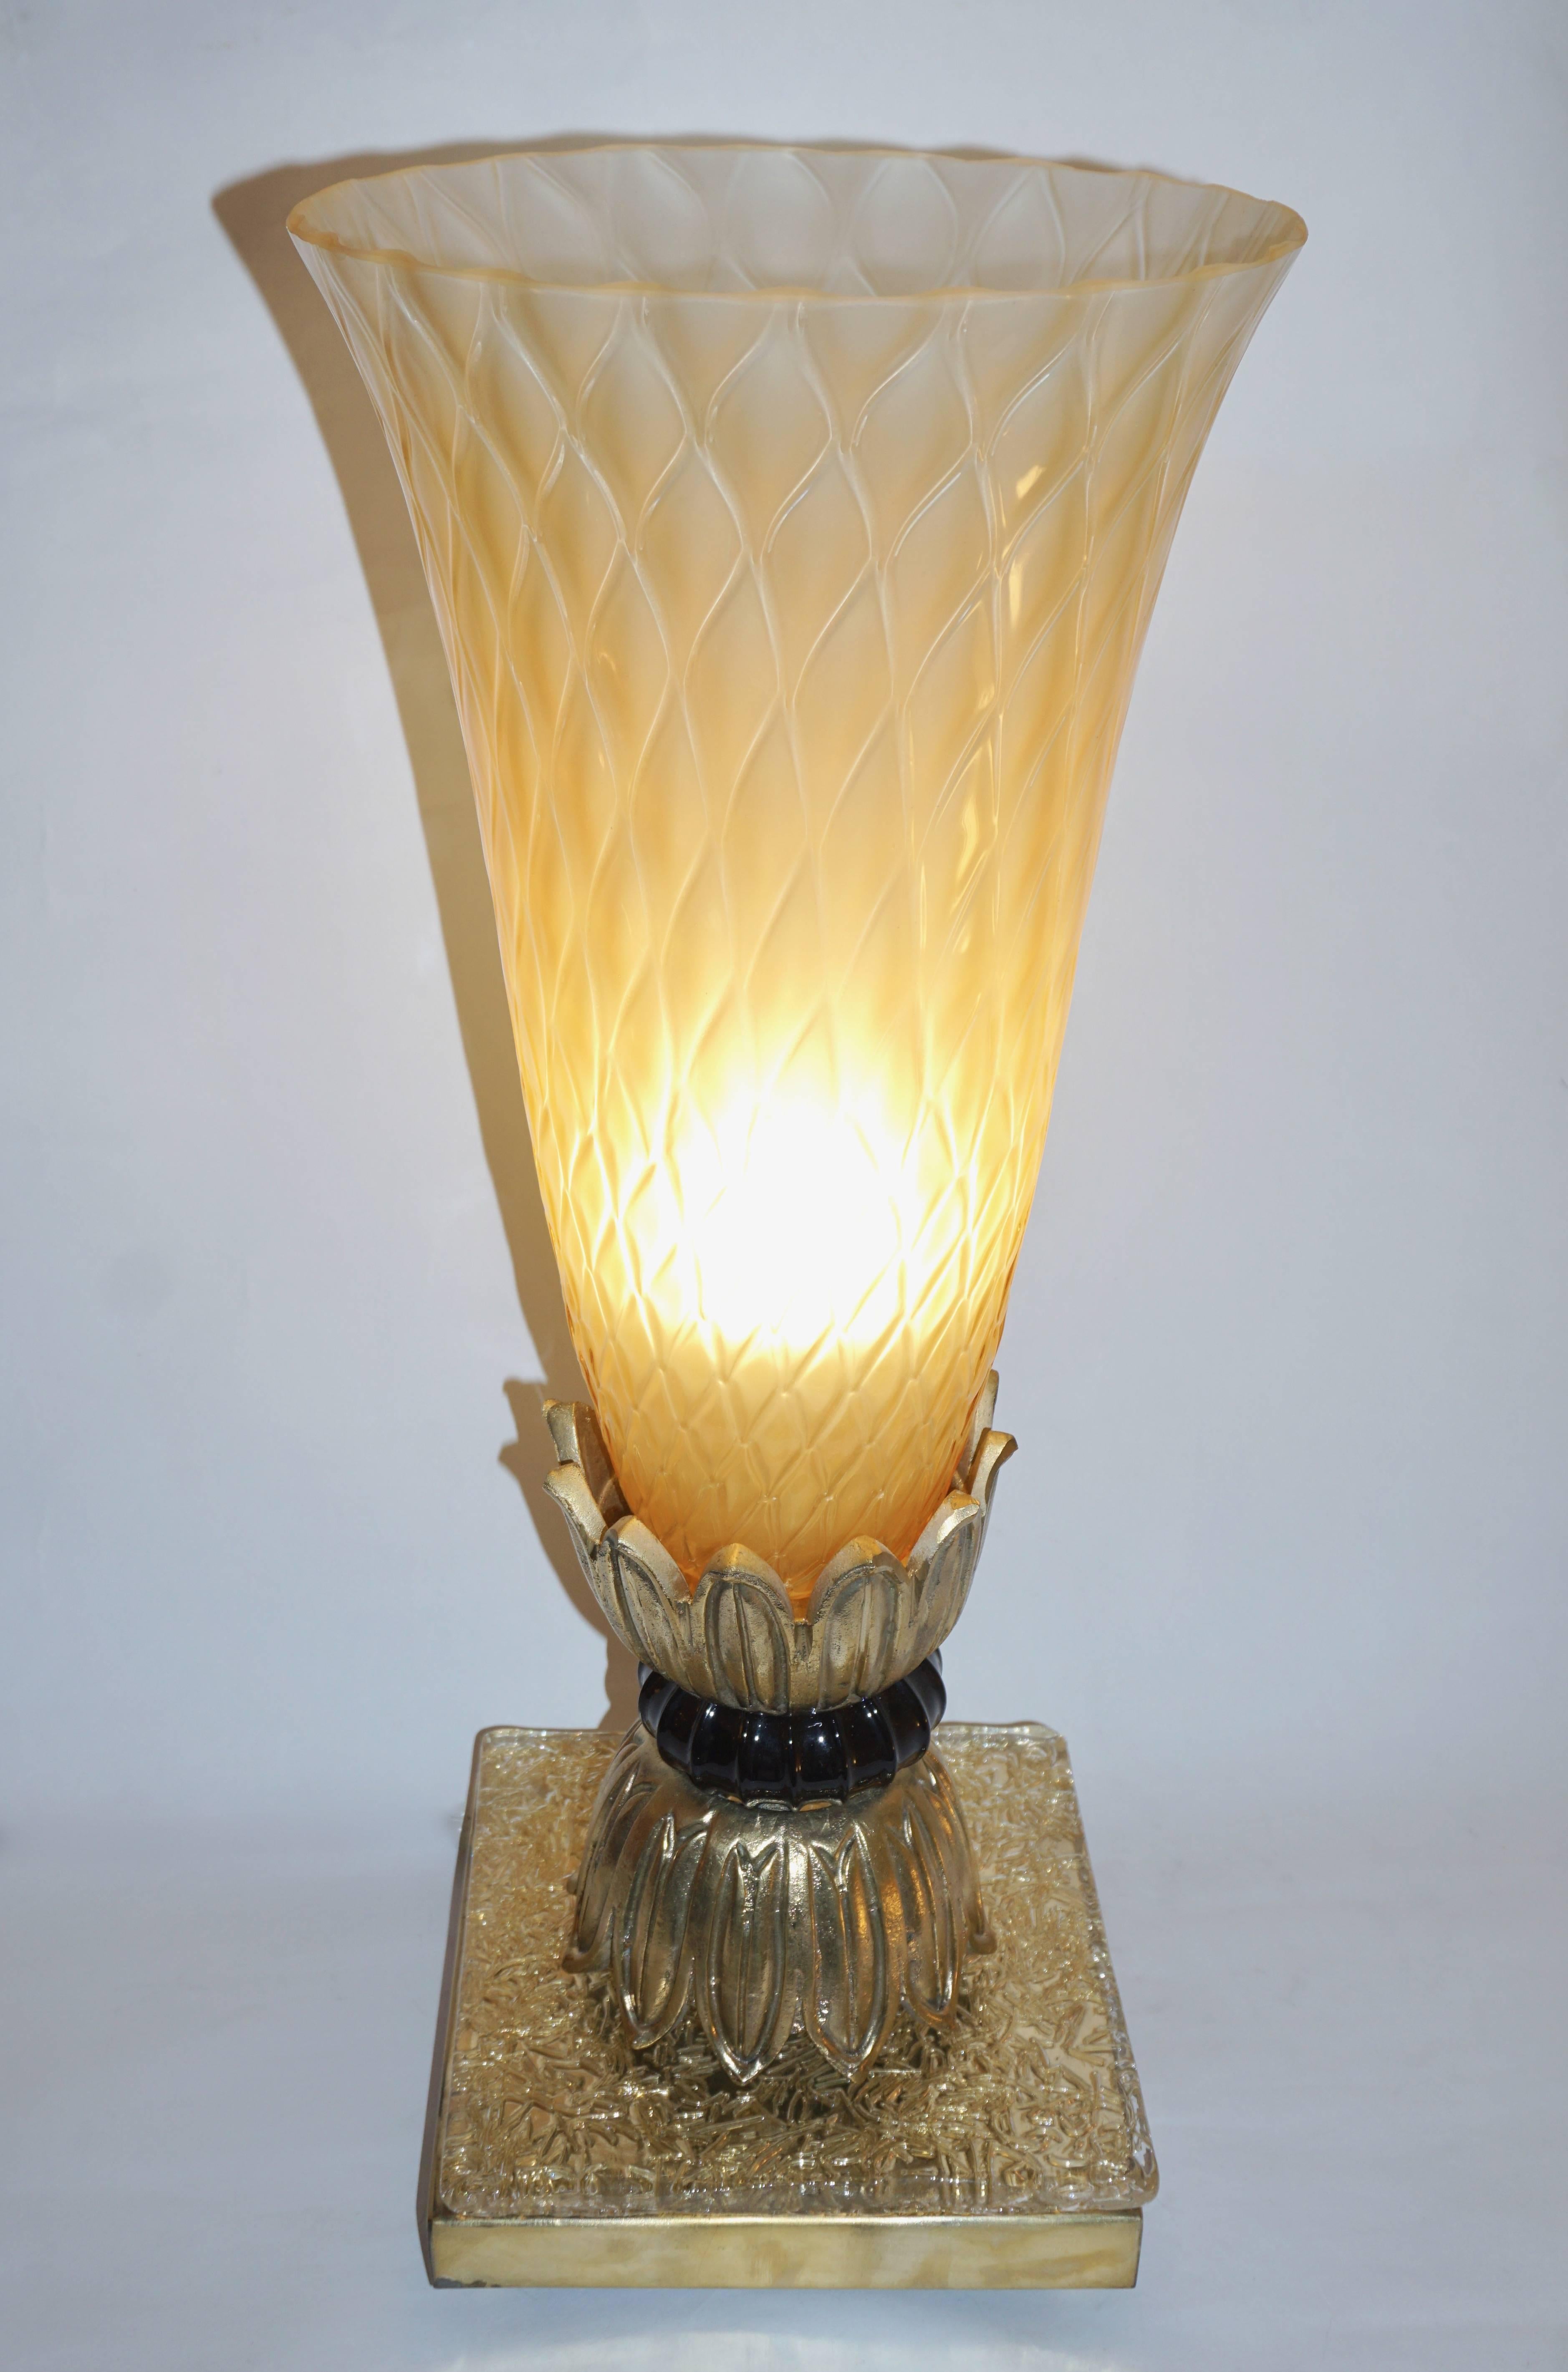 Venetian elegant pair of Art Deco design lamps attributed to Barovier Toso, circa 1970, with exquisite blown glass shades in textured honeycomb amber gold Murano glass supported by cast bronze decorative corollas, raised on a handcrafted brass base